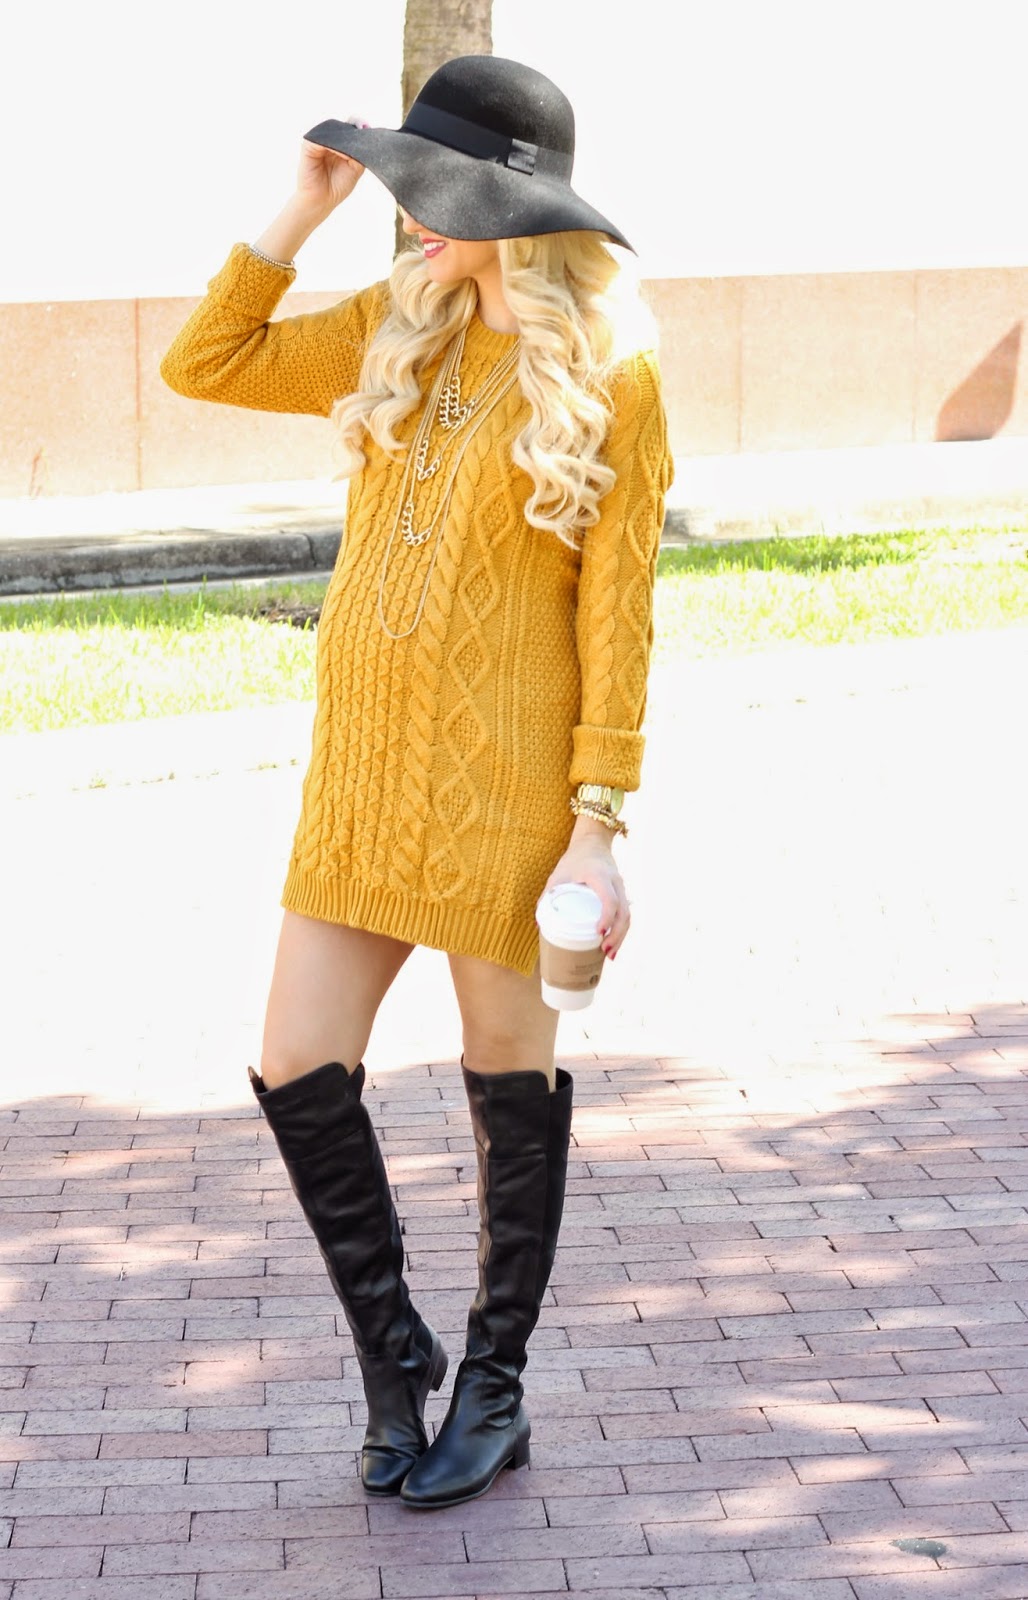 Sweater dress paired with knee high boots